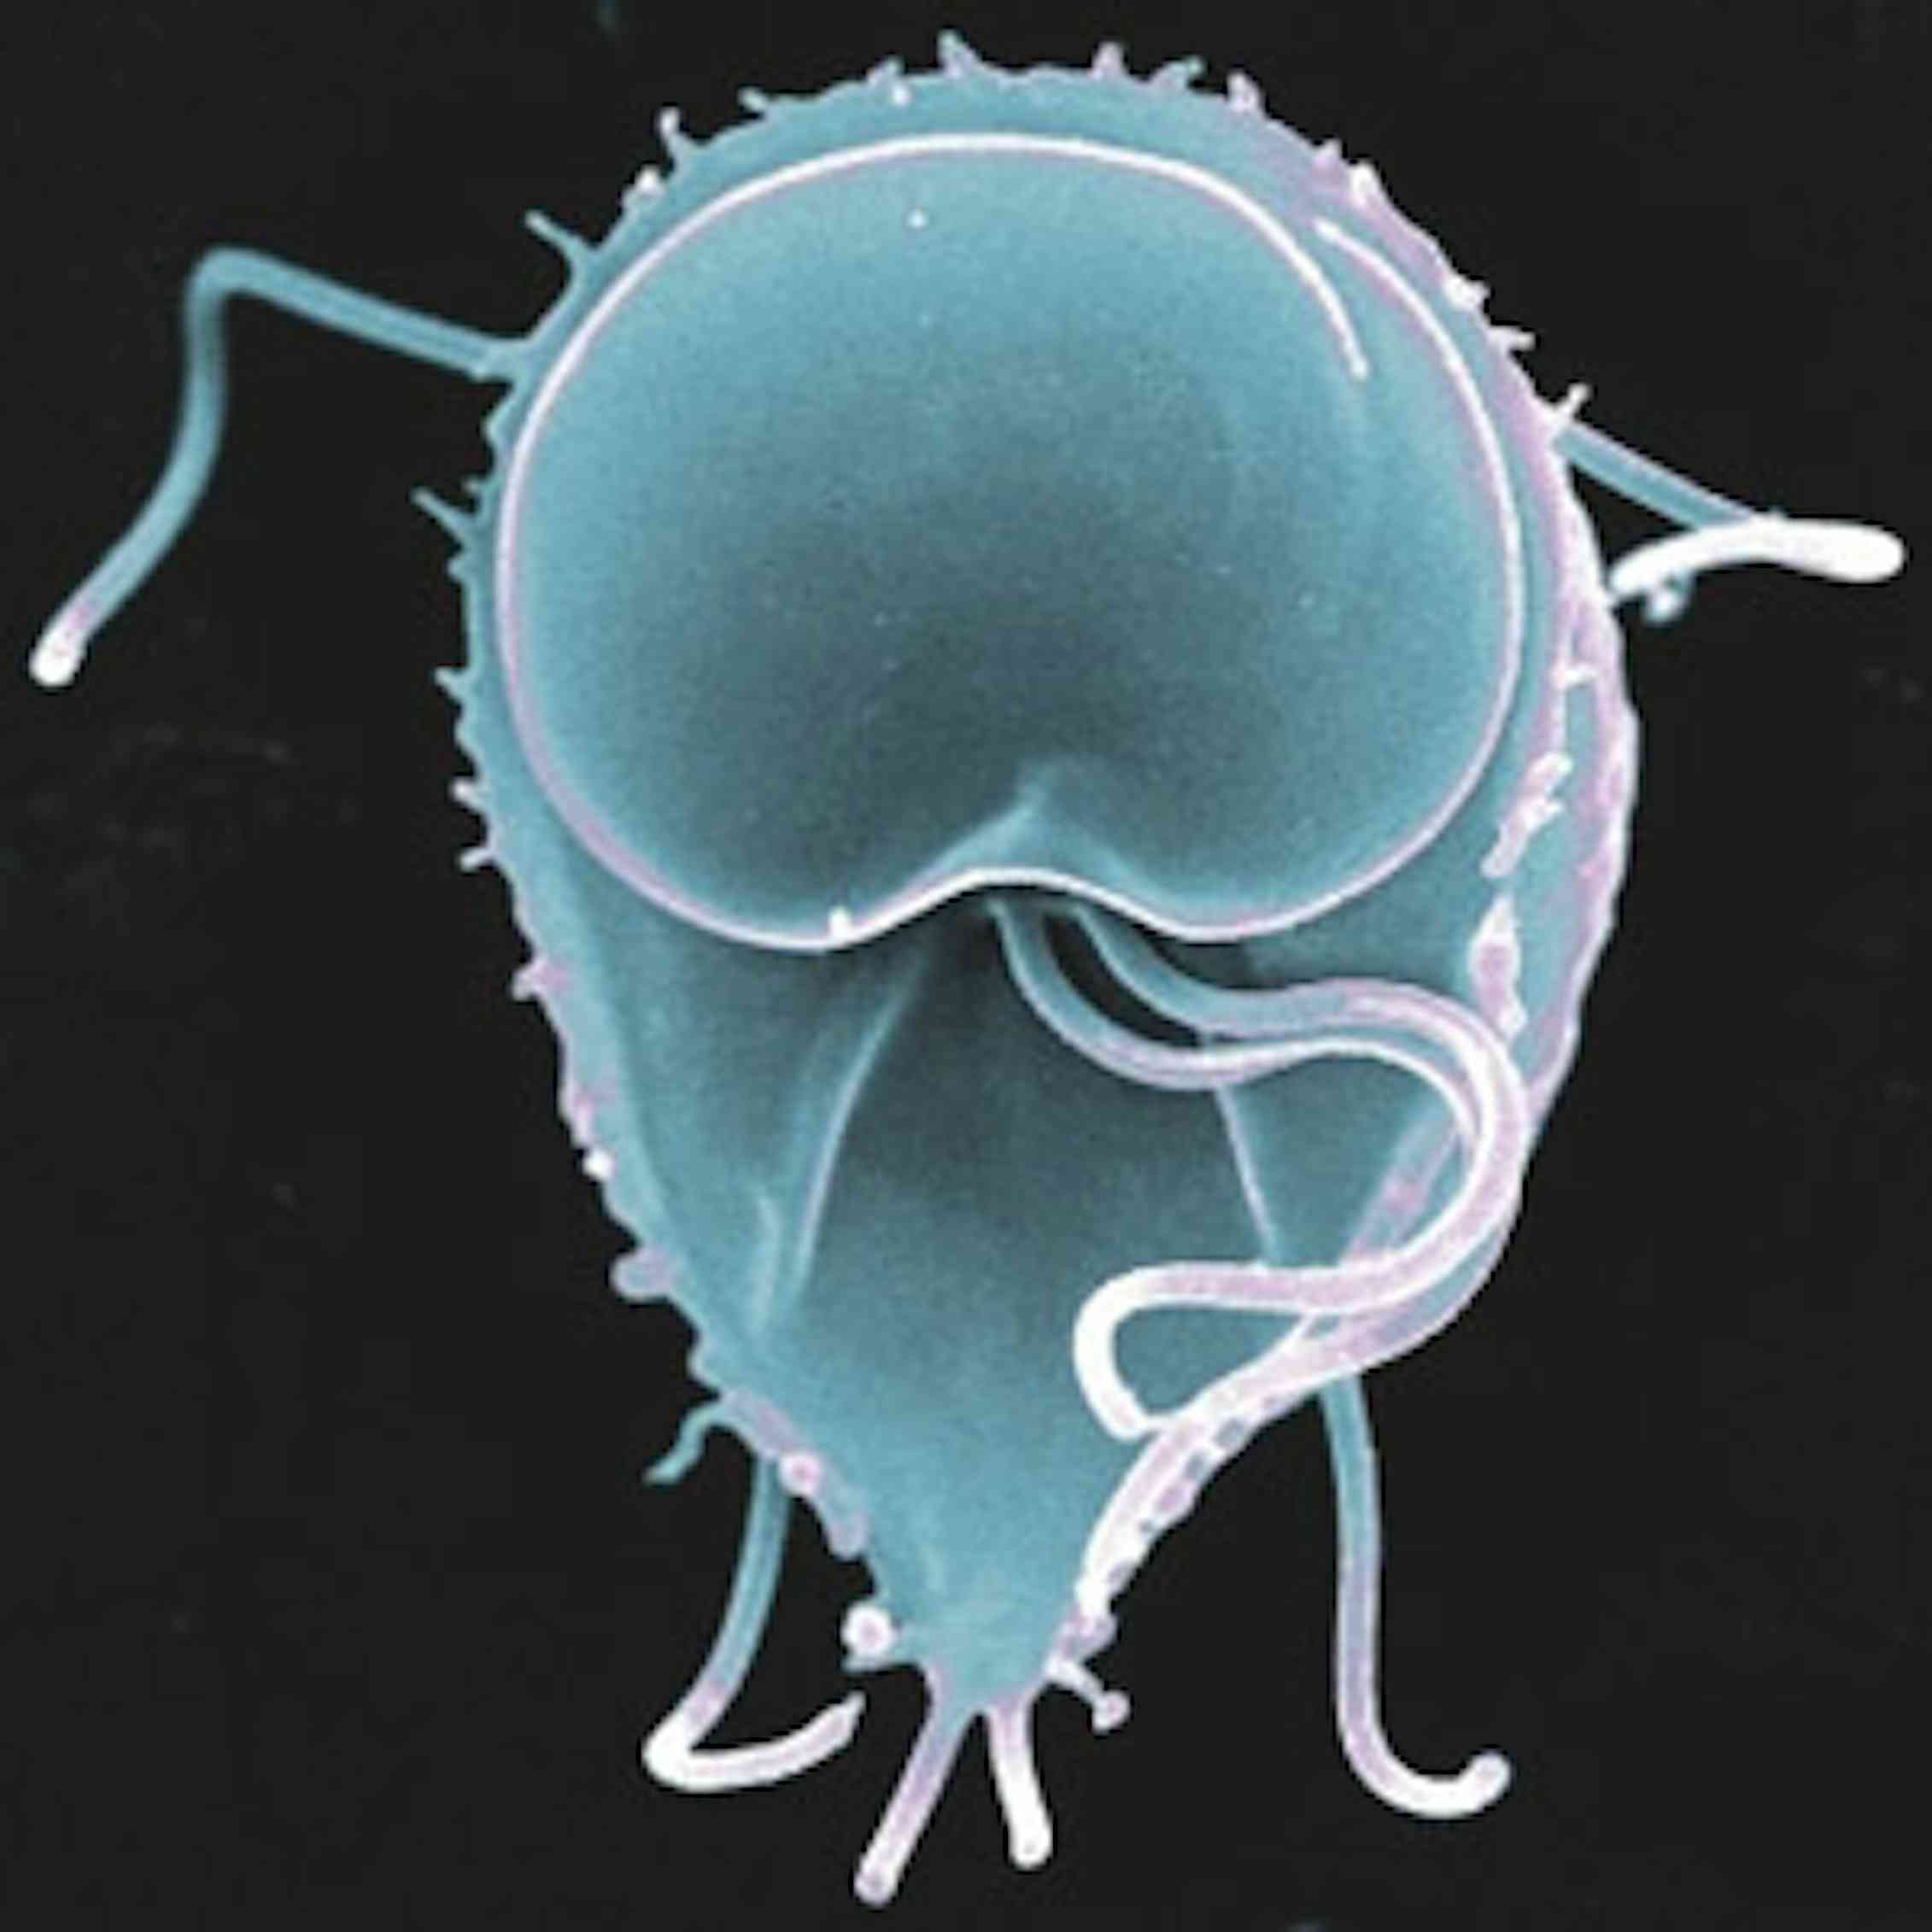 Six human parasites you definitely don't want to host